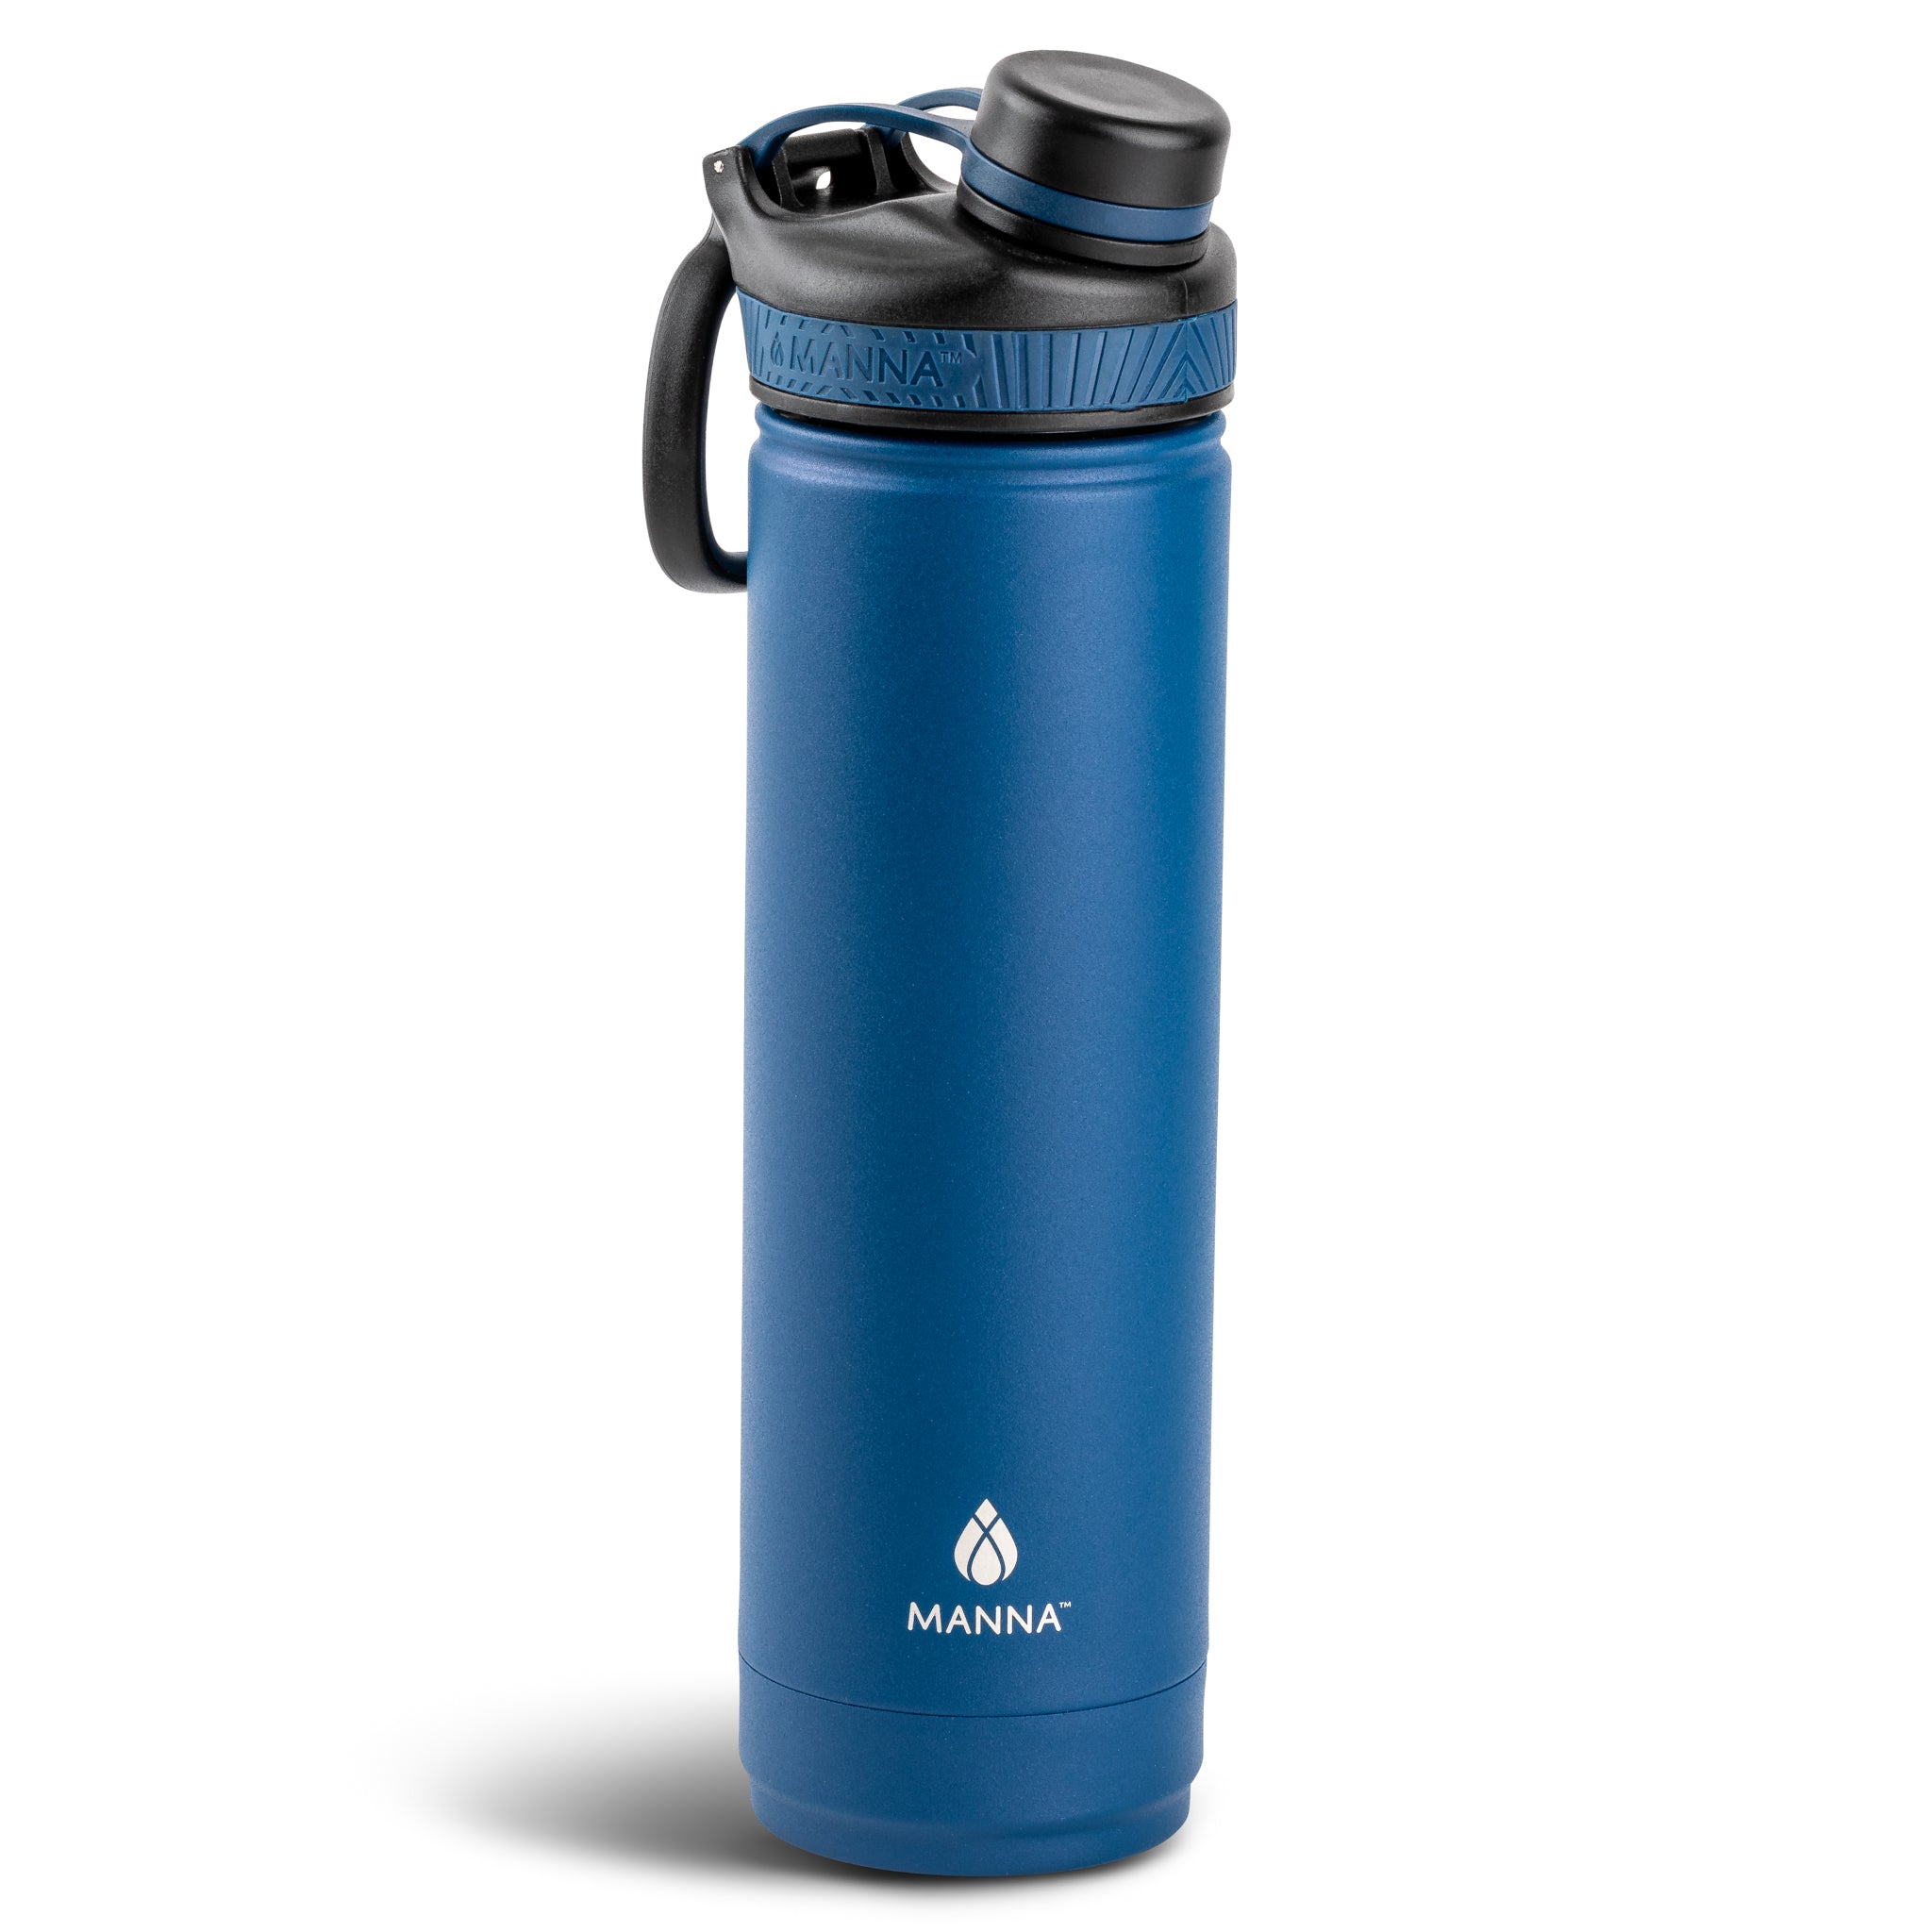 Manna Thermos Stainless Steel Insulated Bottle BPA Free 1 Gal 4 L Blue  Folding